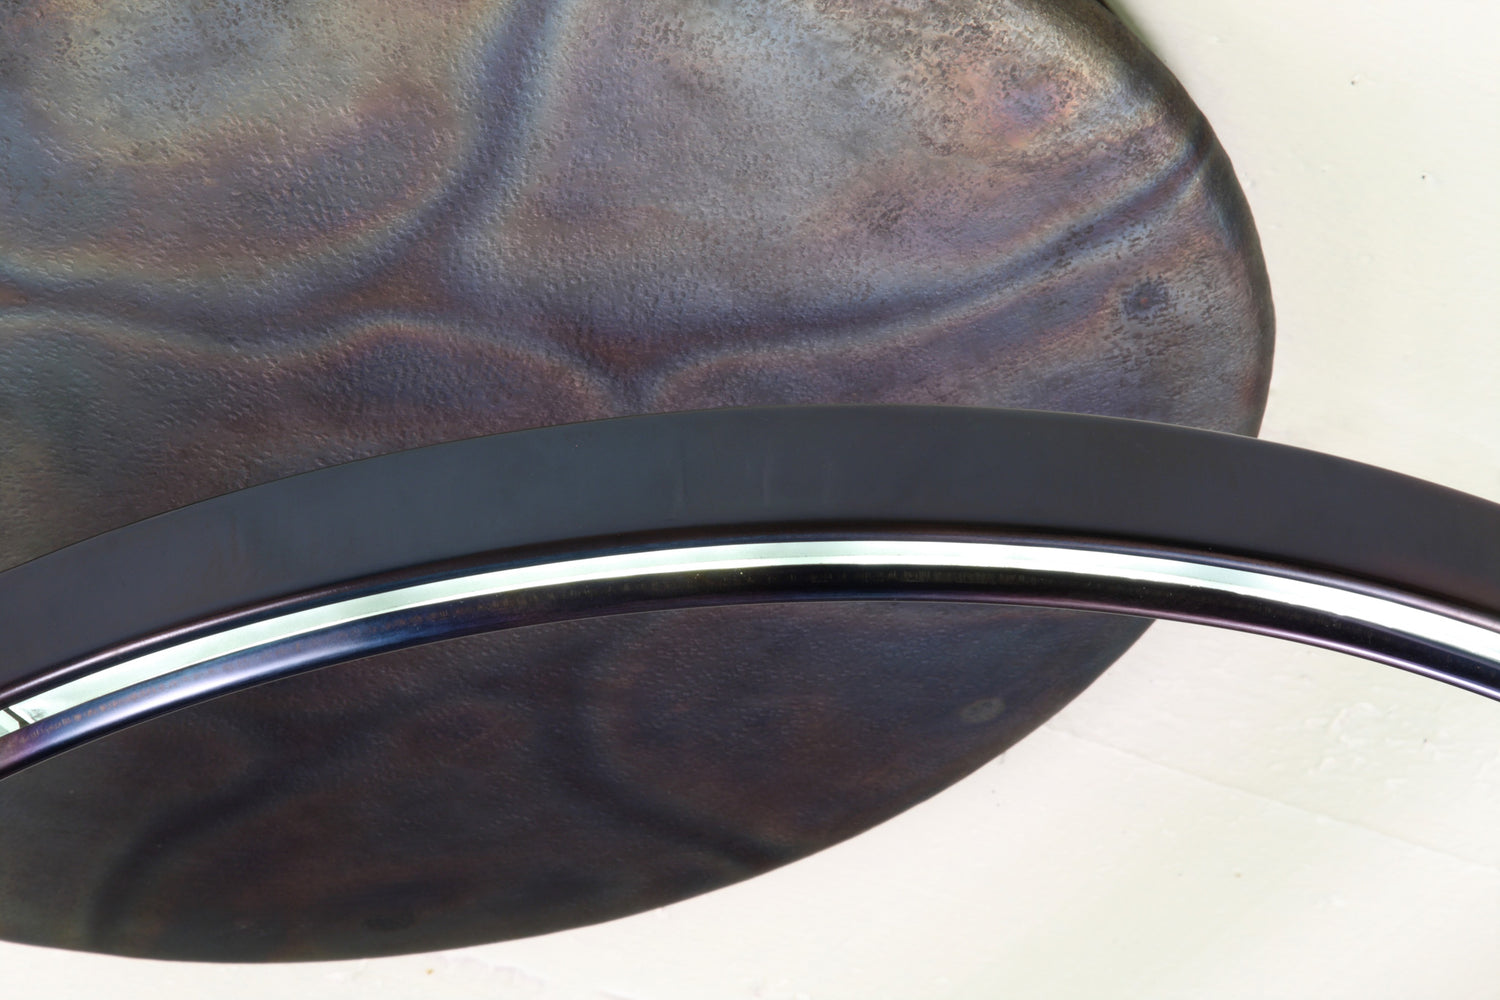 Eclipse Celling Light